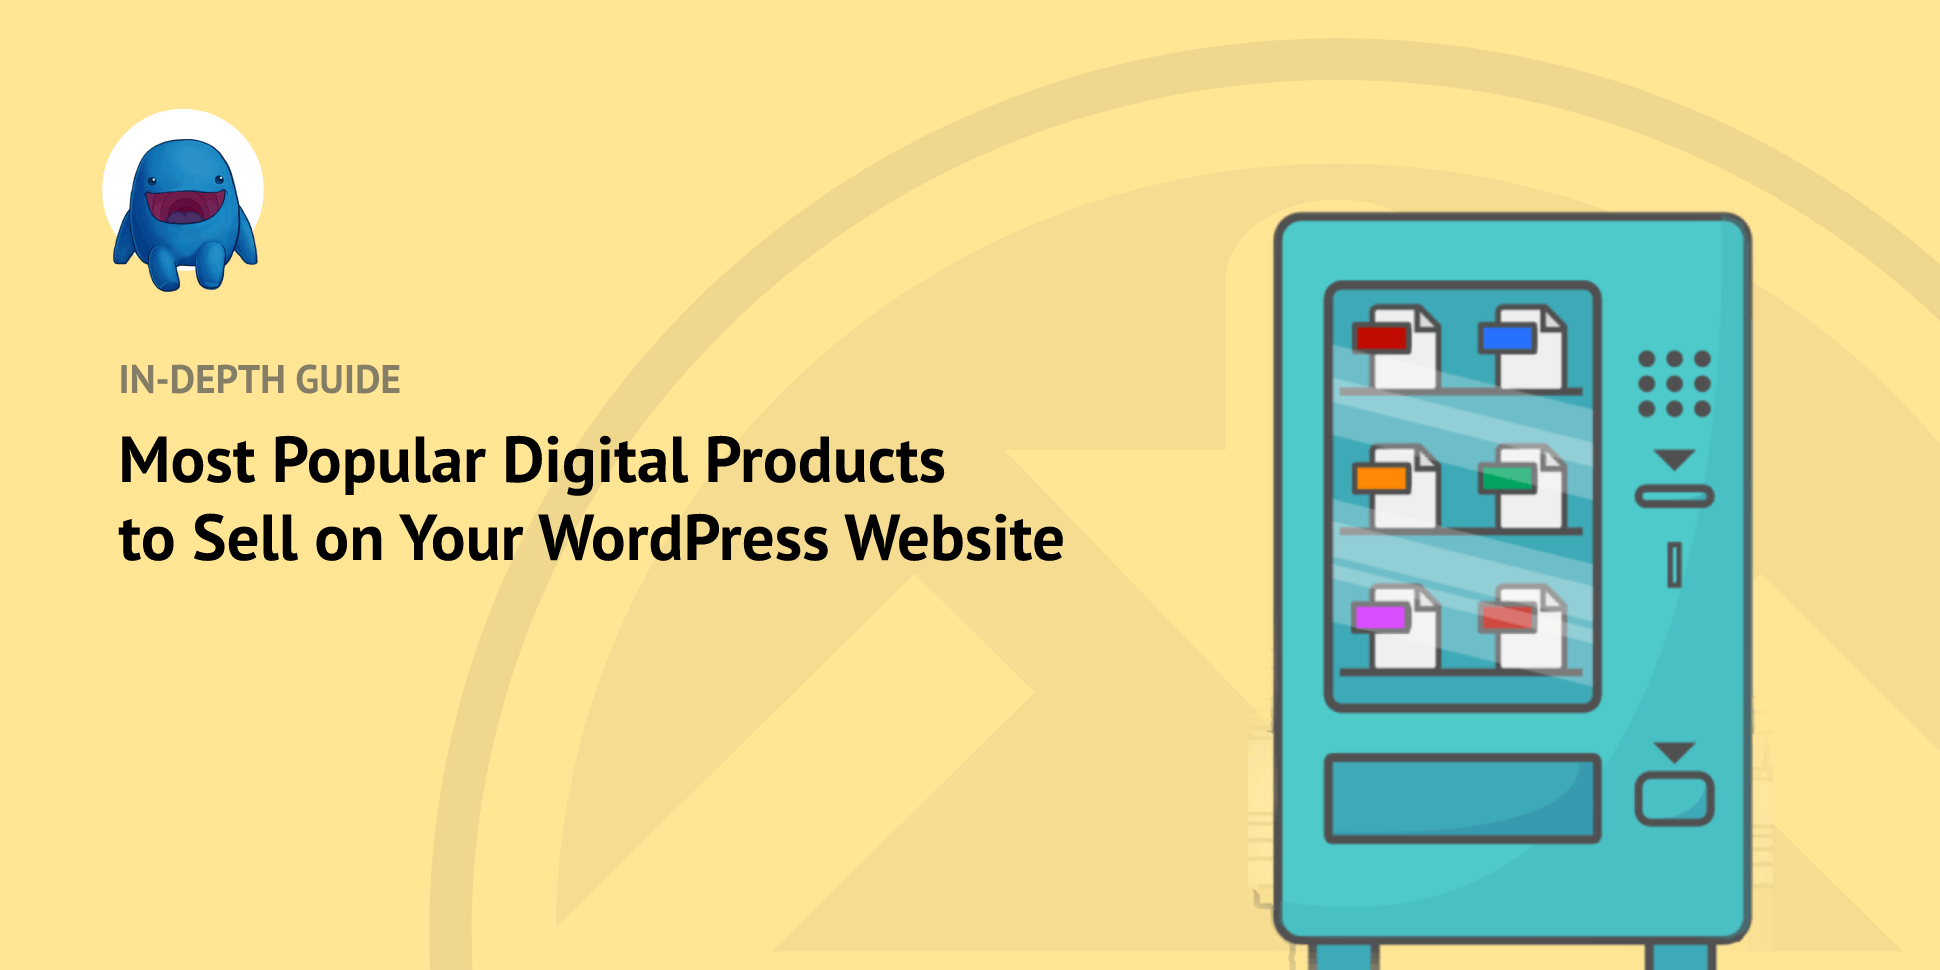 The Most Popular Digital Products to Sell in WordPress